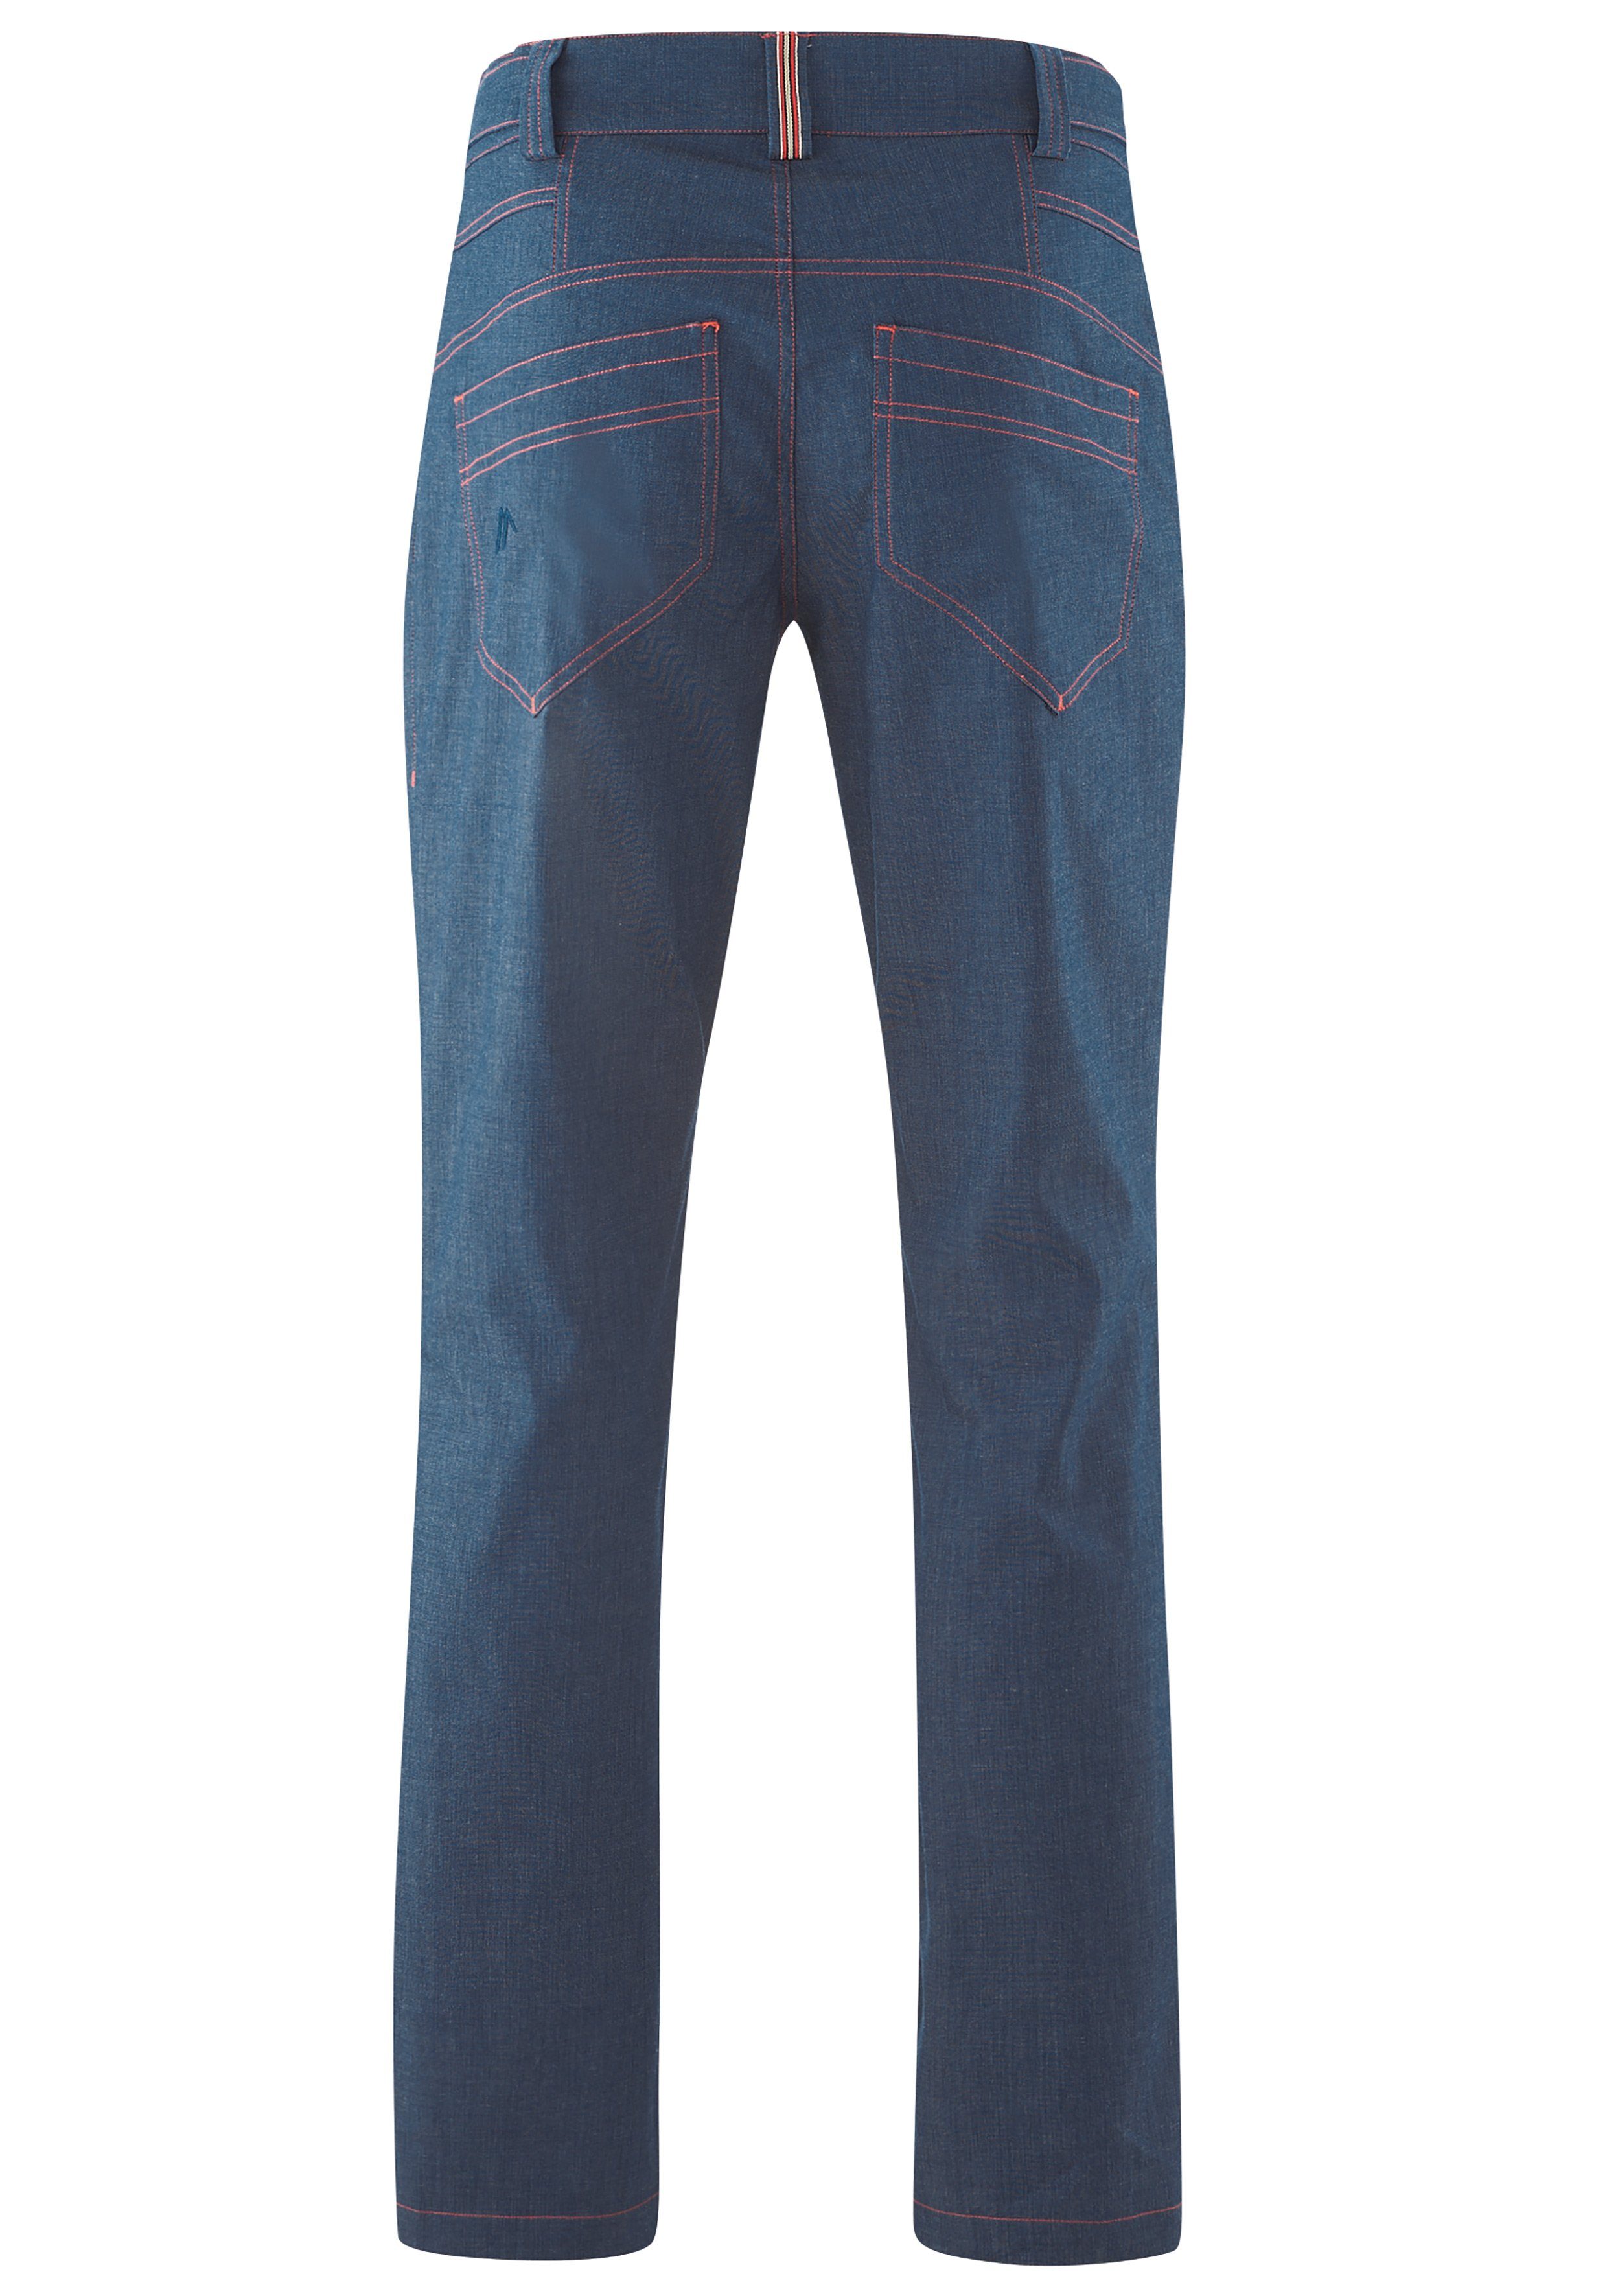 Coole Pyrit M Funktionshose Maier Jeans-Look im Sports 2.0 Outdoorhose